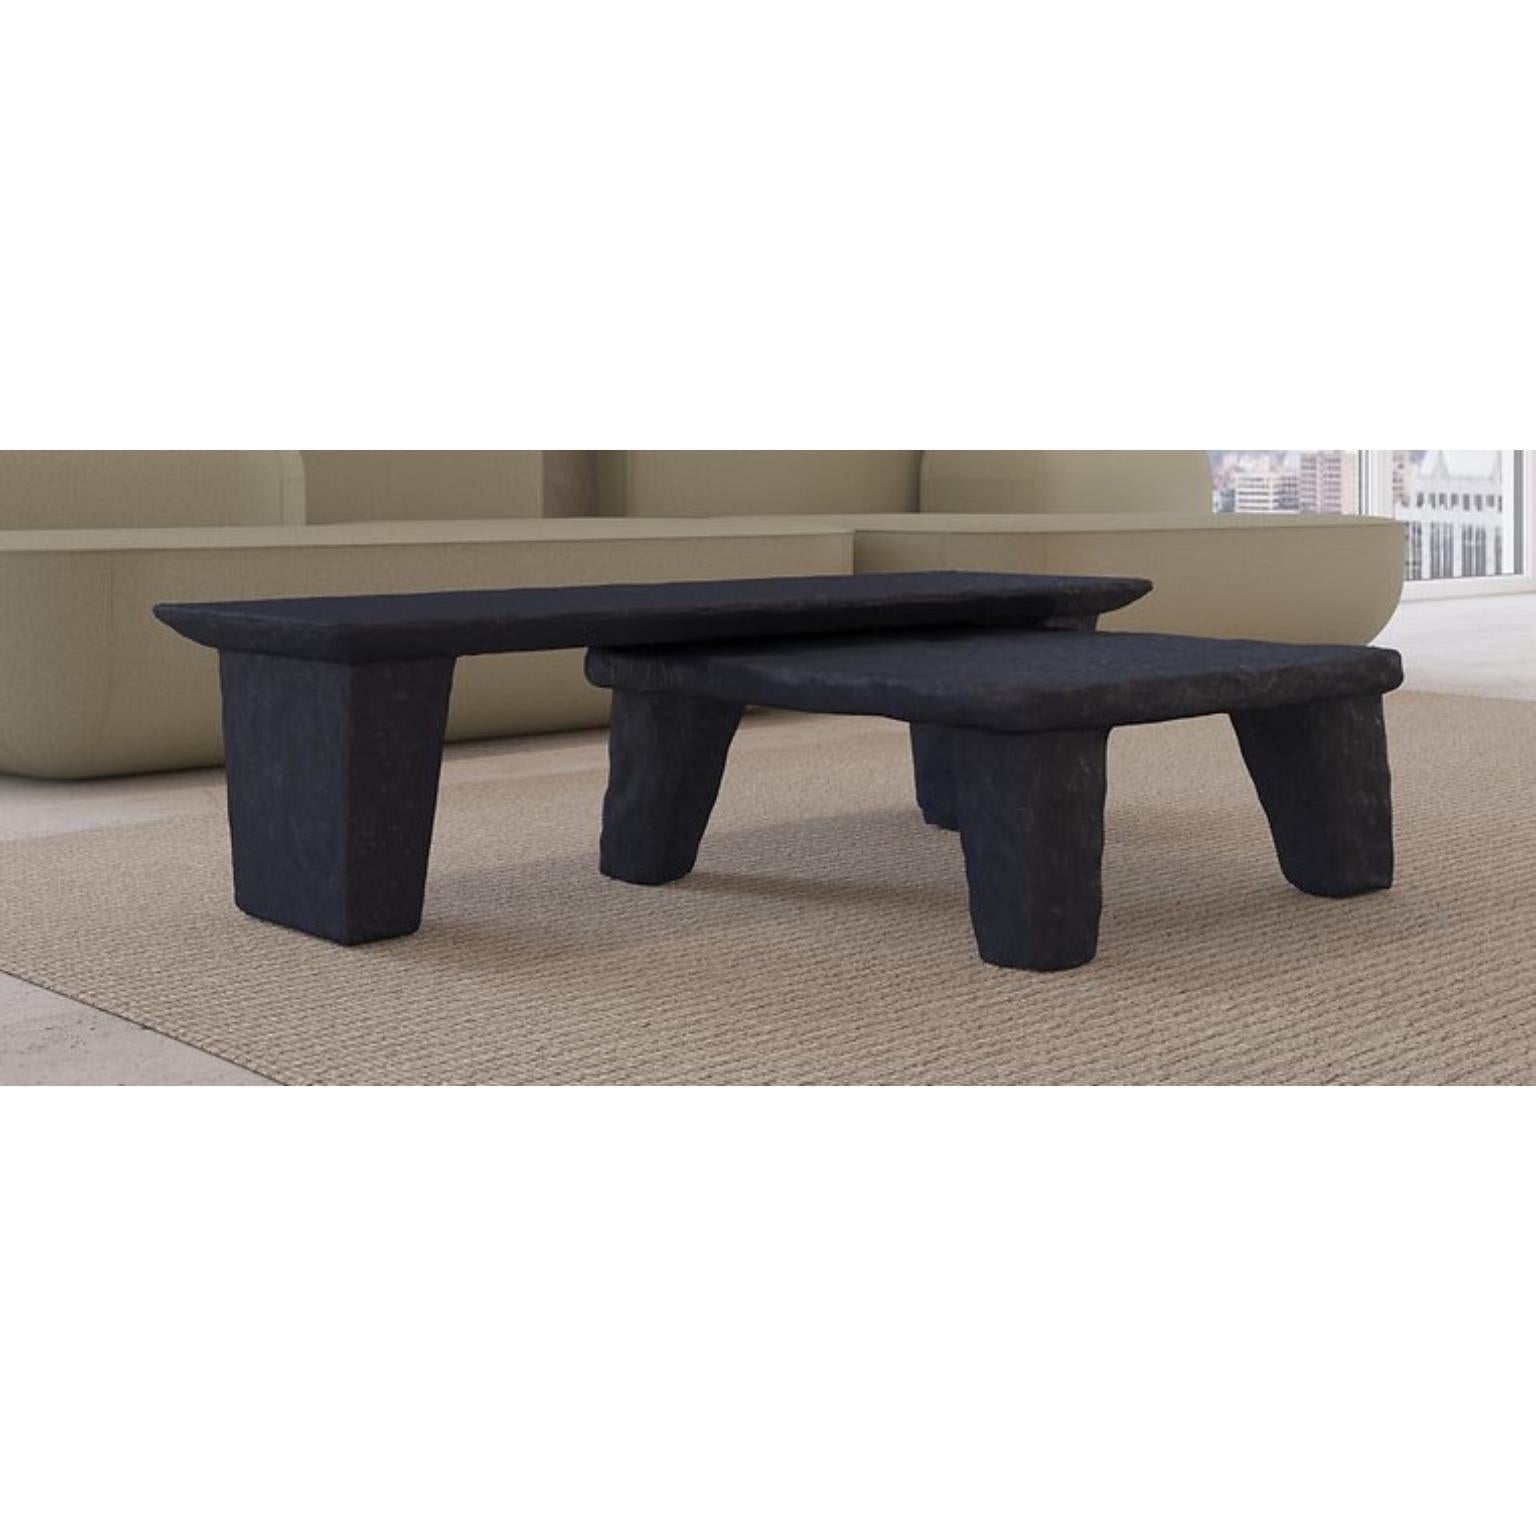 Steel Set of 2 Ztista Low Tables by Faina